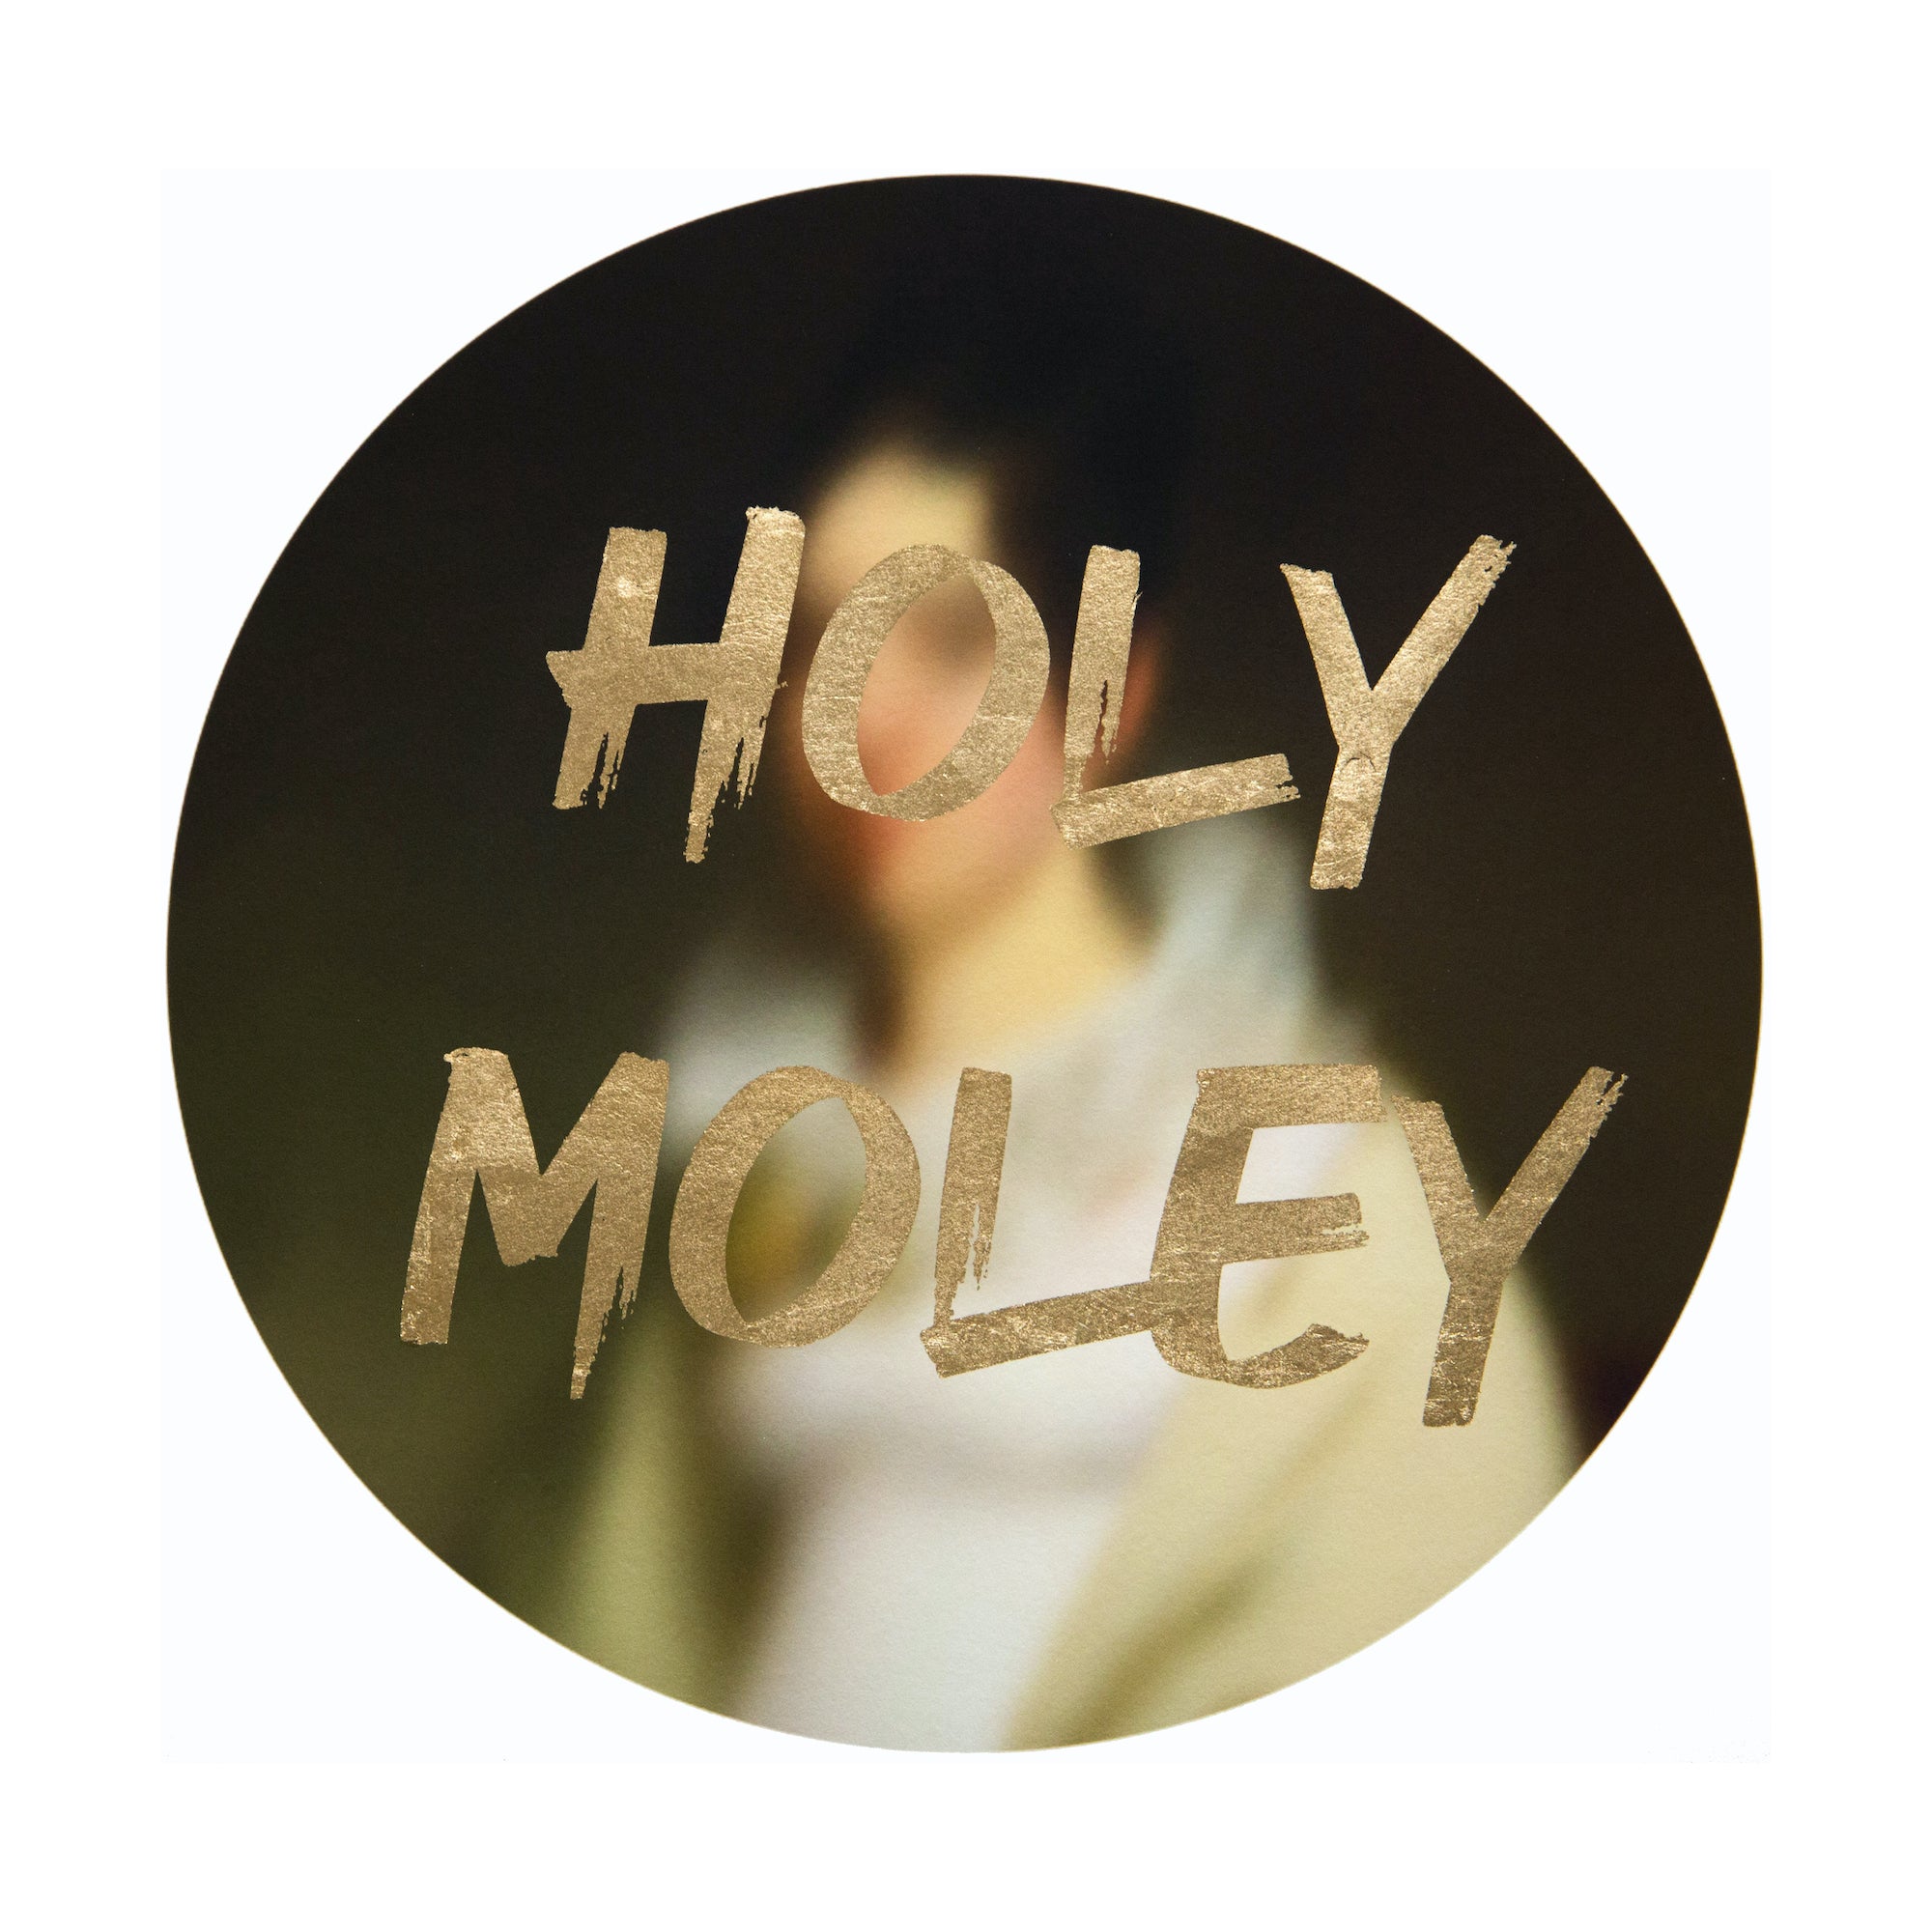 "HOLY MOLEY" Limited Edition Hand Finished Print By AA Watson